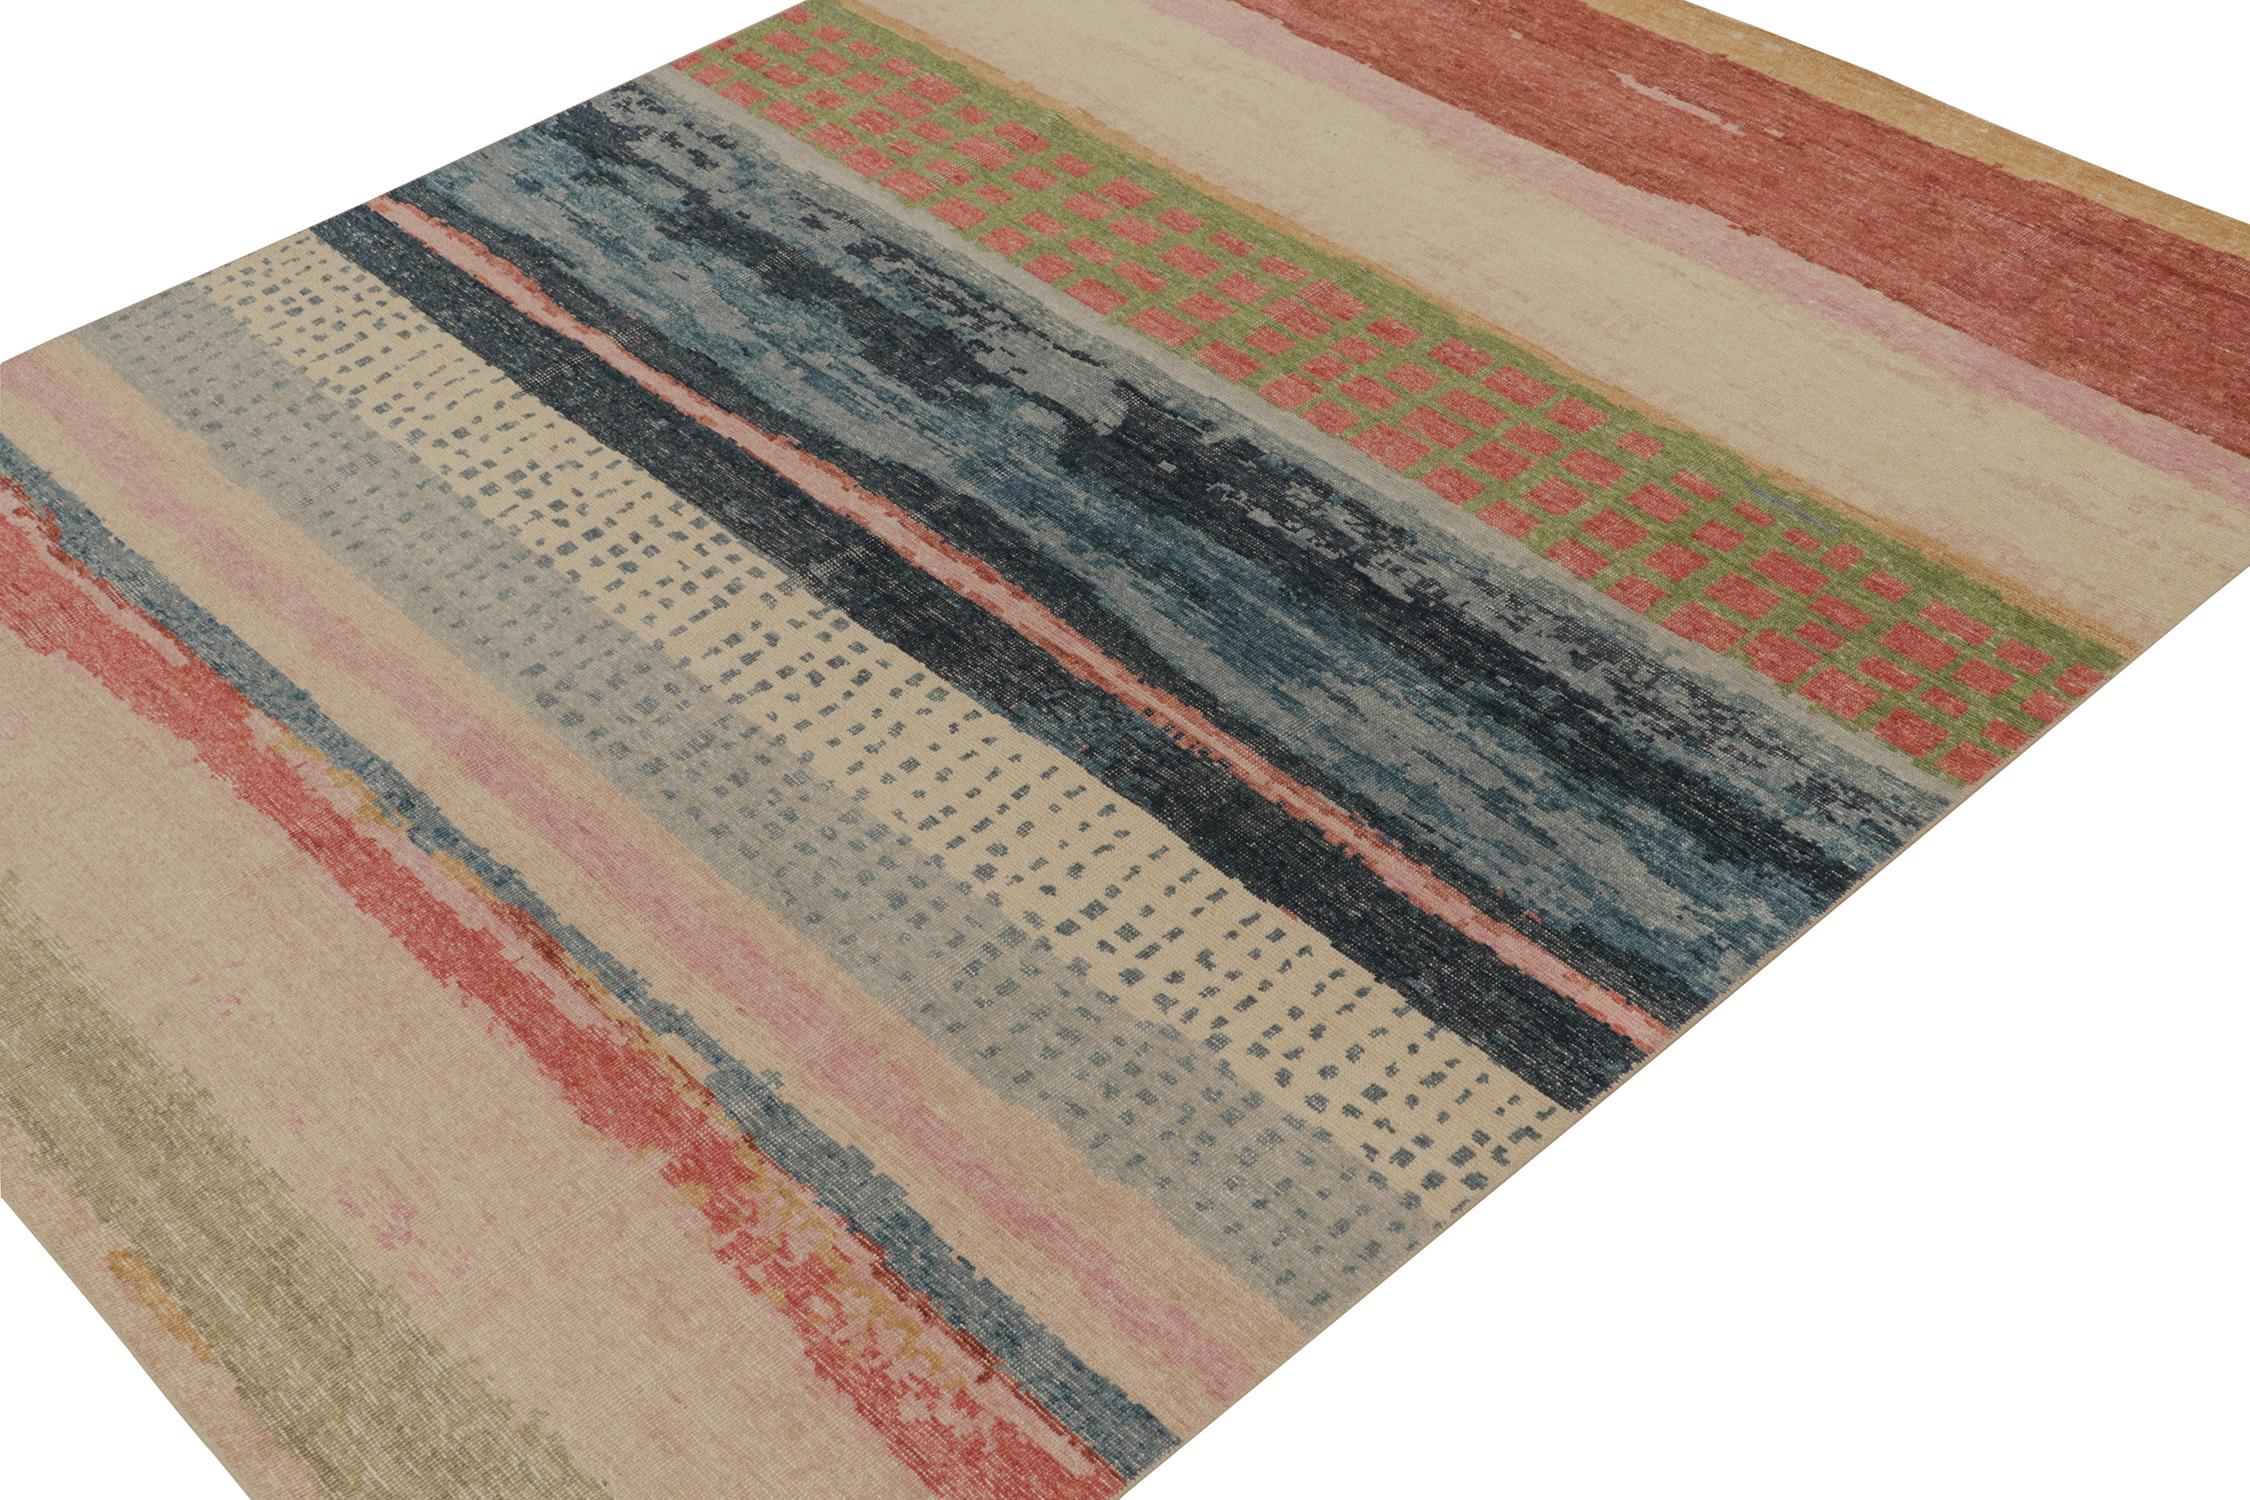 This contemporary 8x10 abstract rug is a new addition to the Homage Collection by Rug & Kilim. Hand-knotted in wool and cotton.

Further On the Design:

This design enjoys a splash of colors with horizontal stripes, dots, and other painterly